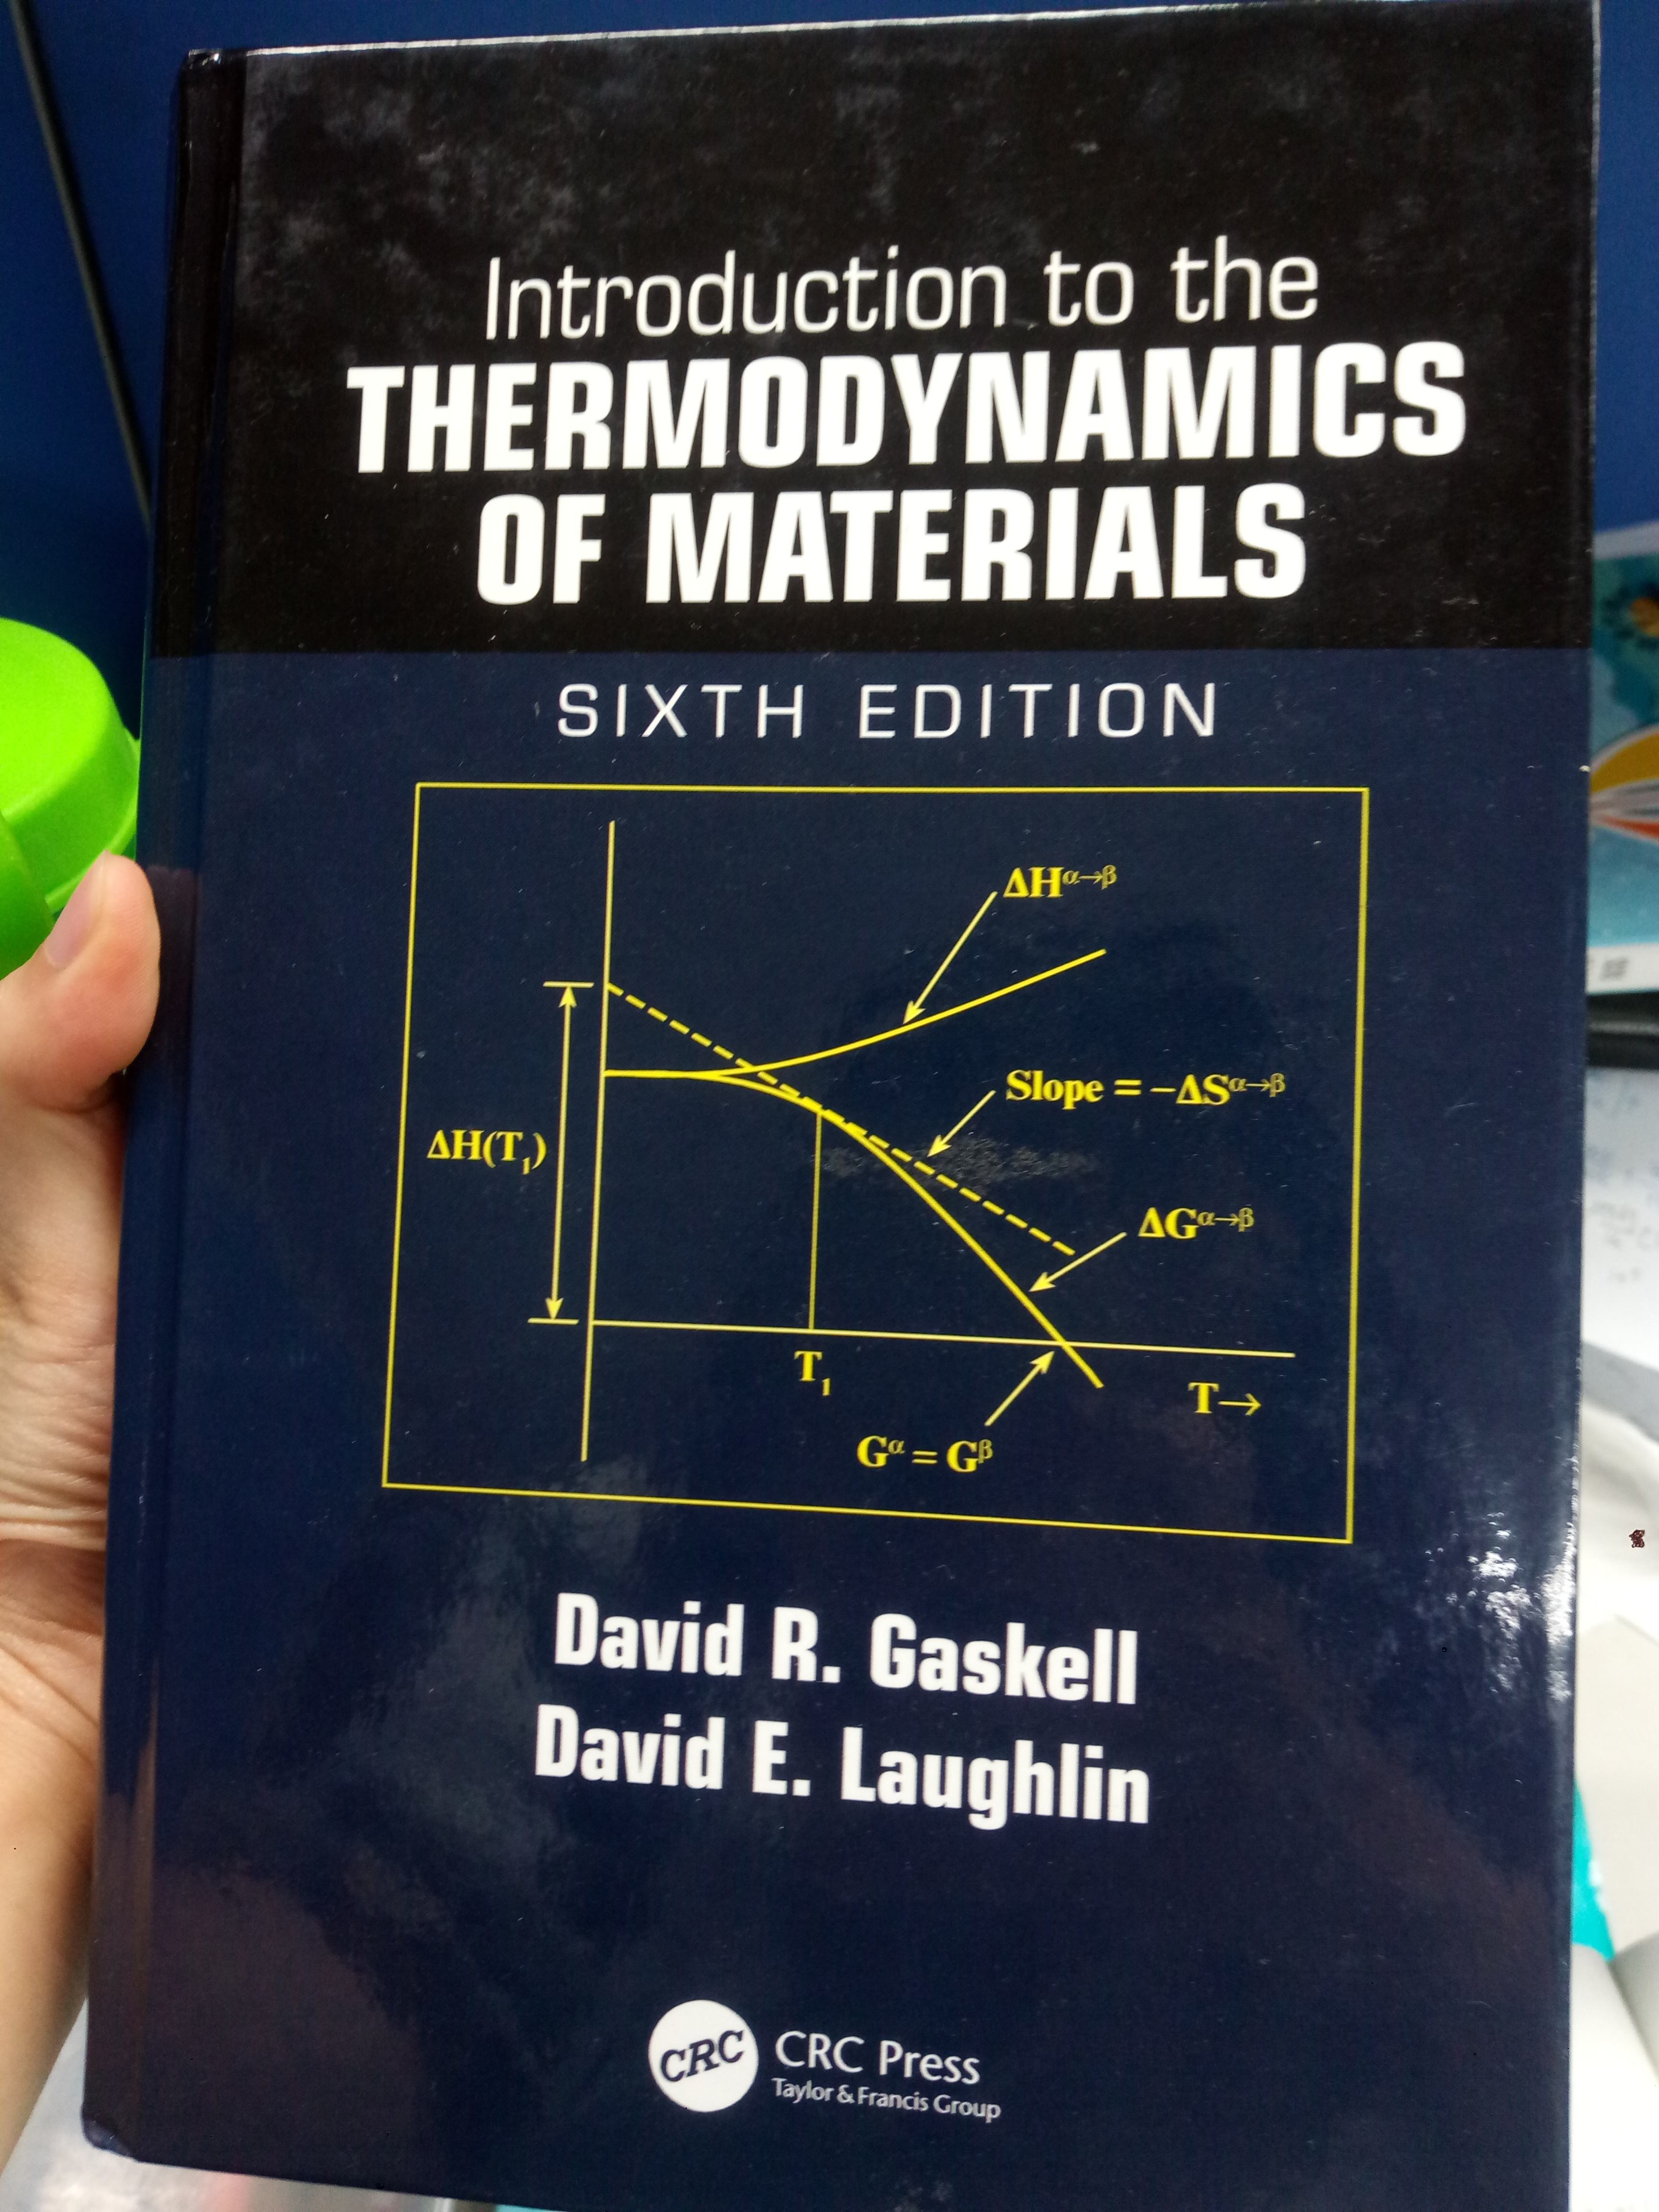 Introduction to the thermodynamics of materials sixth edition 詳細資料